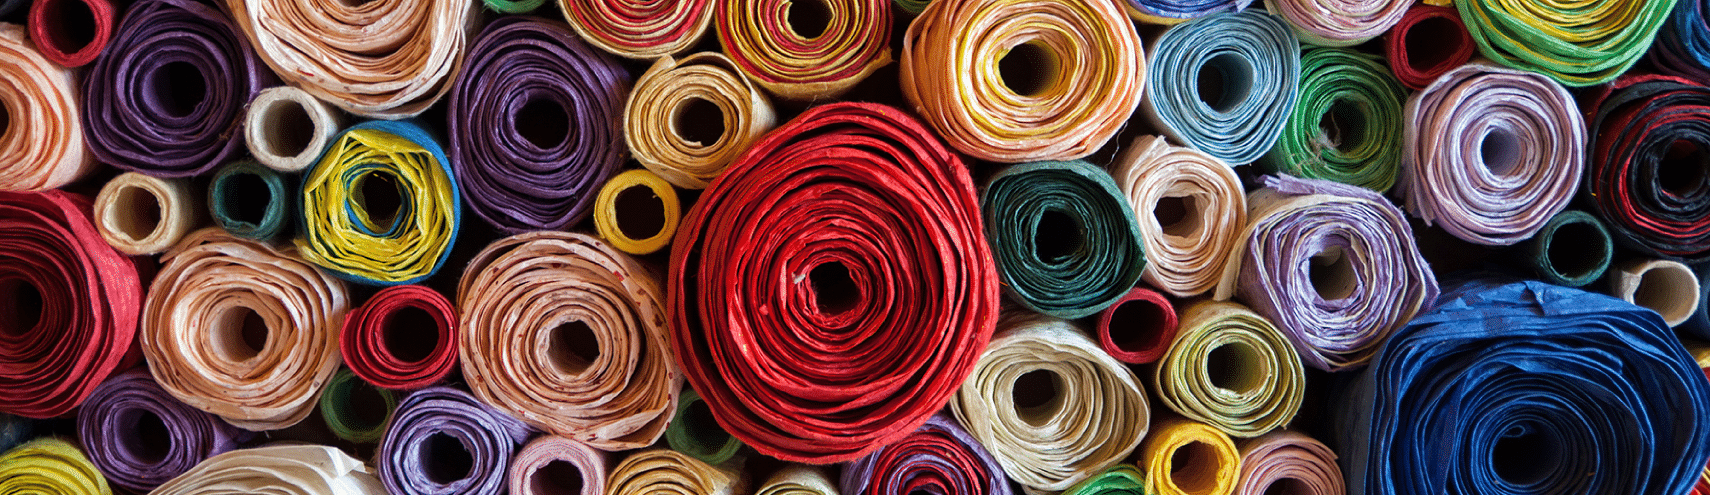 Rolls of colored fabric